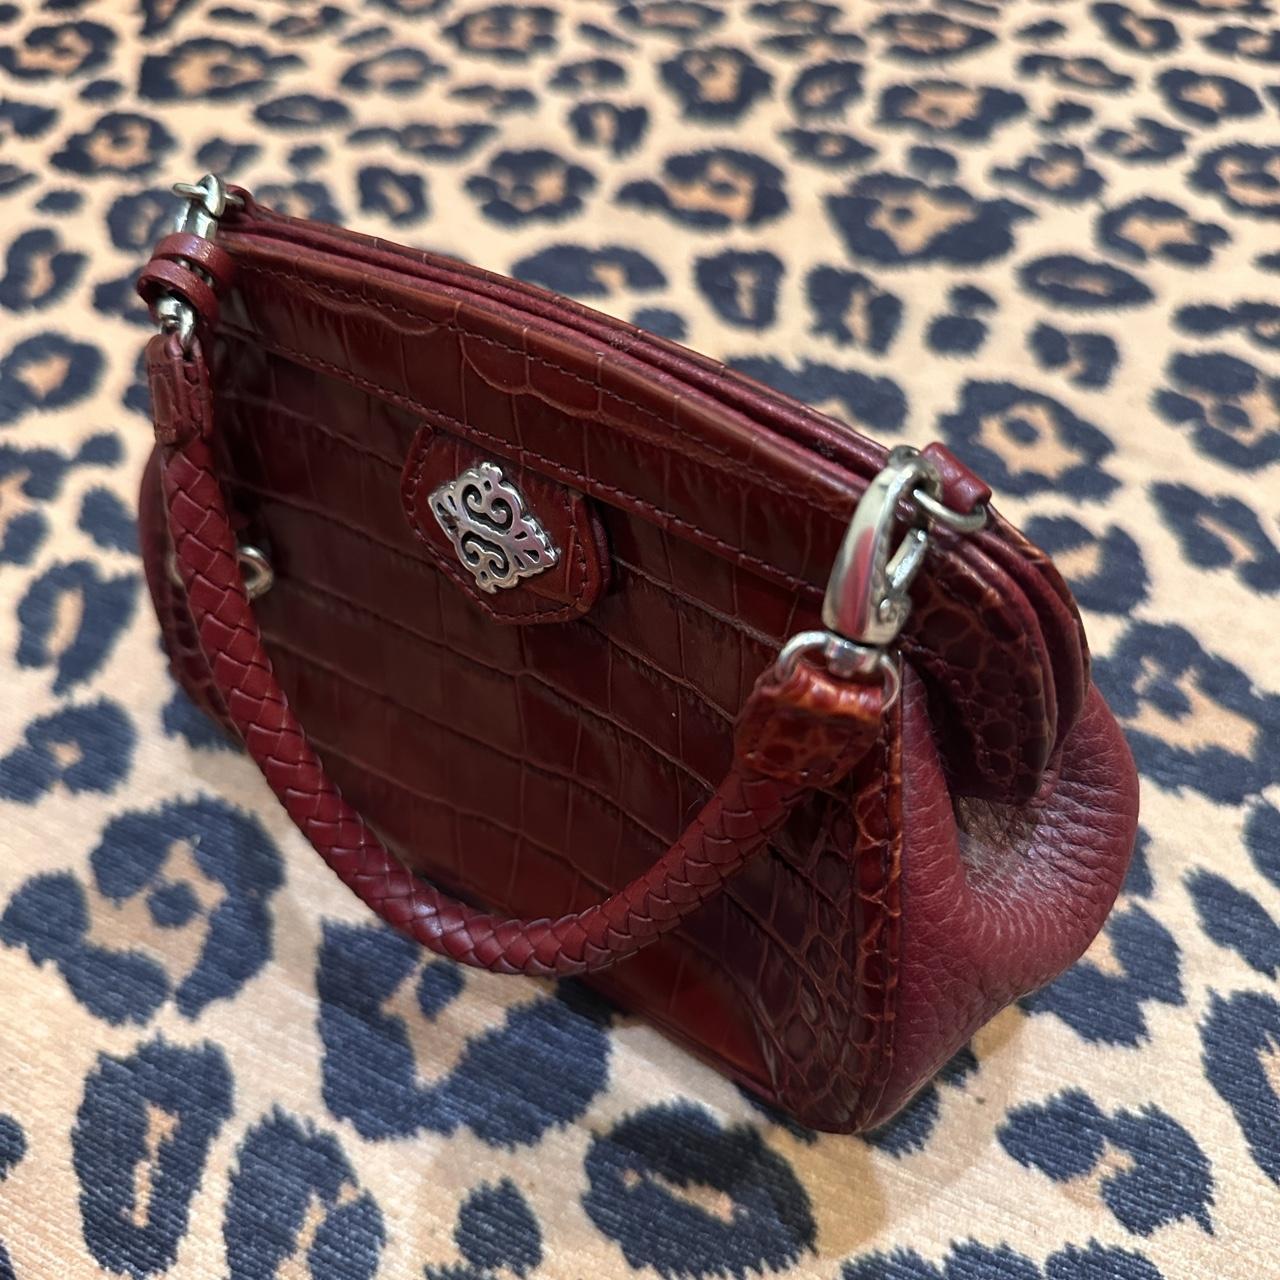 Brighton Red Leather & Woven Straw Purse - Etsy